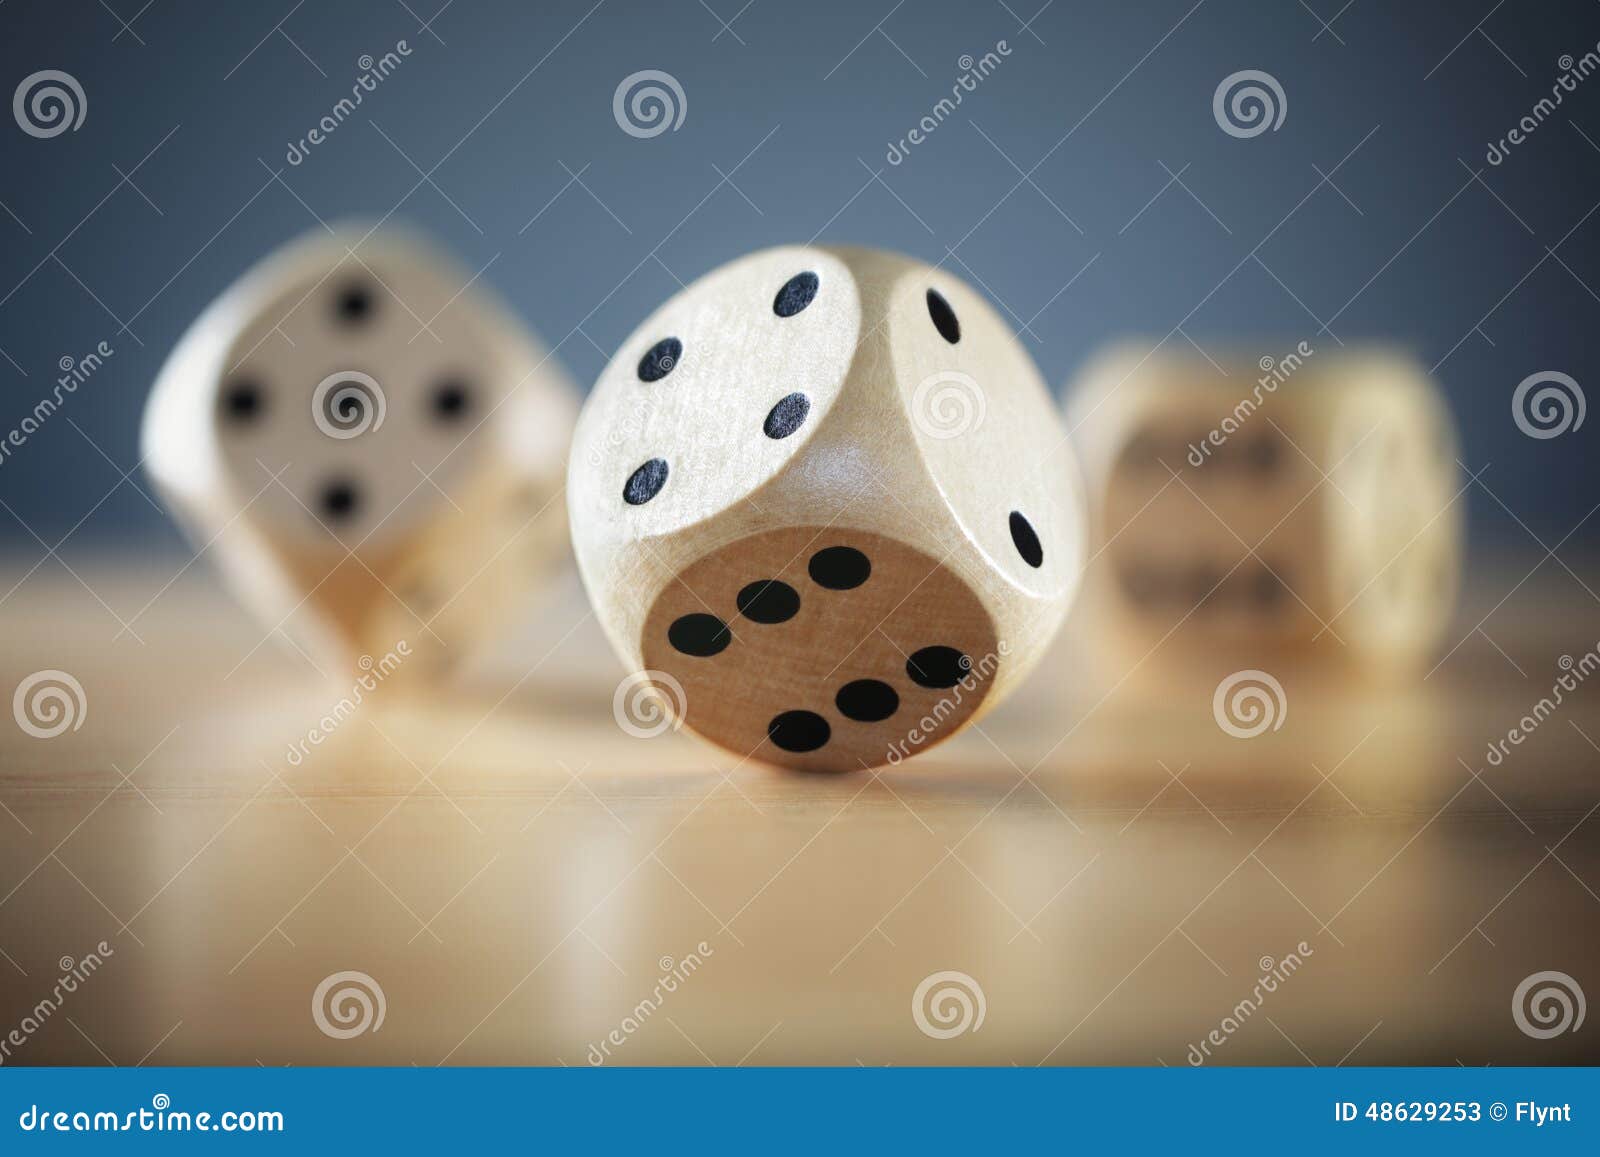 rolling the dice